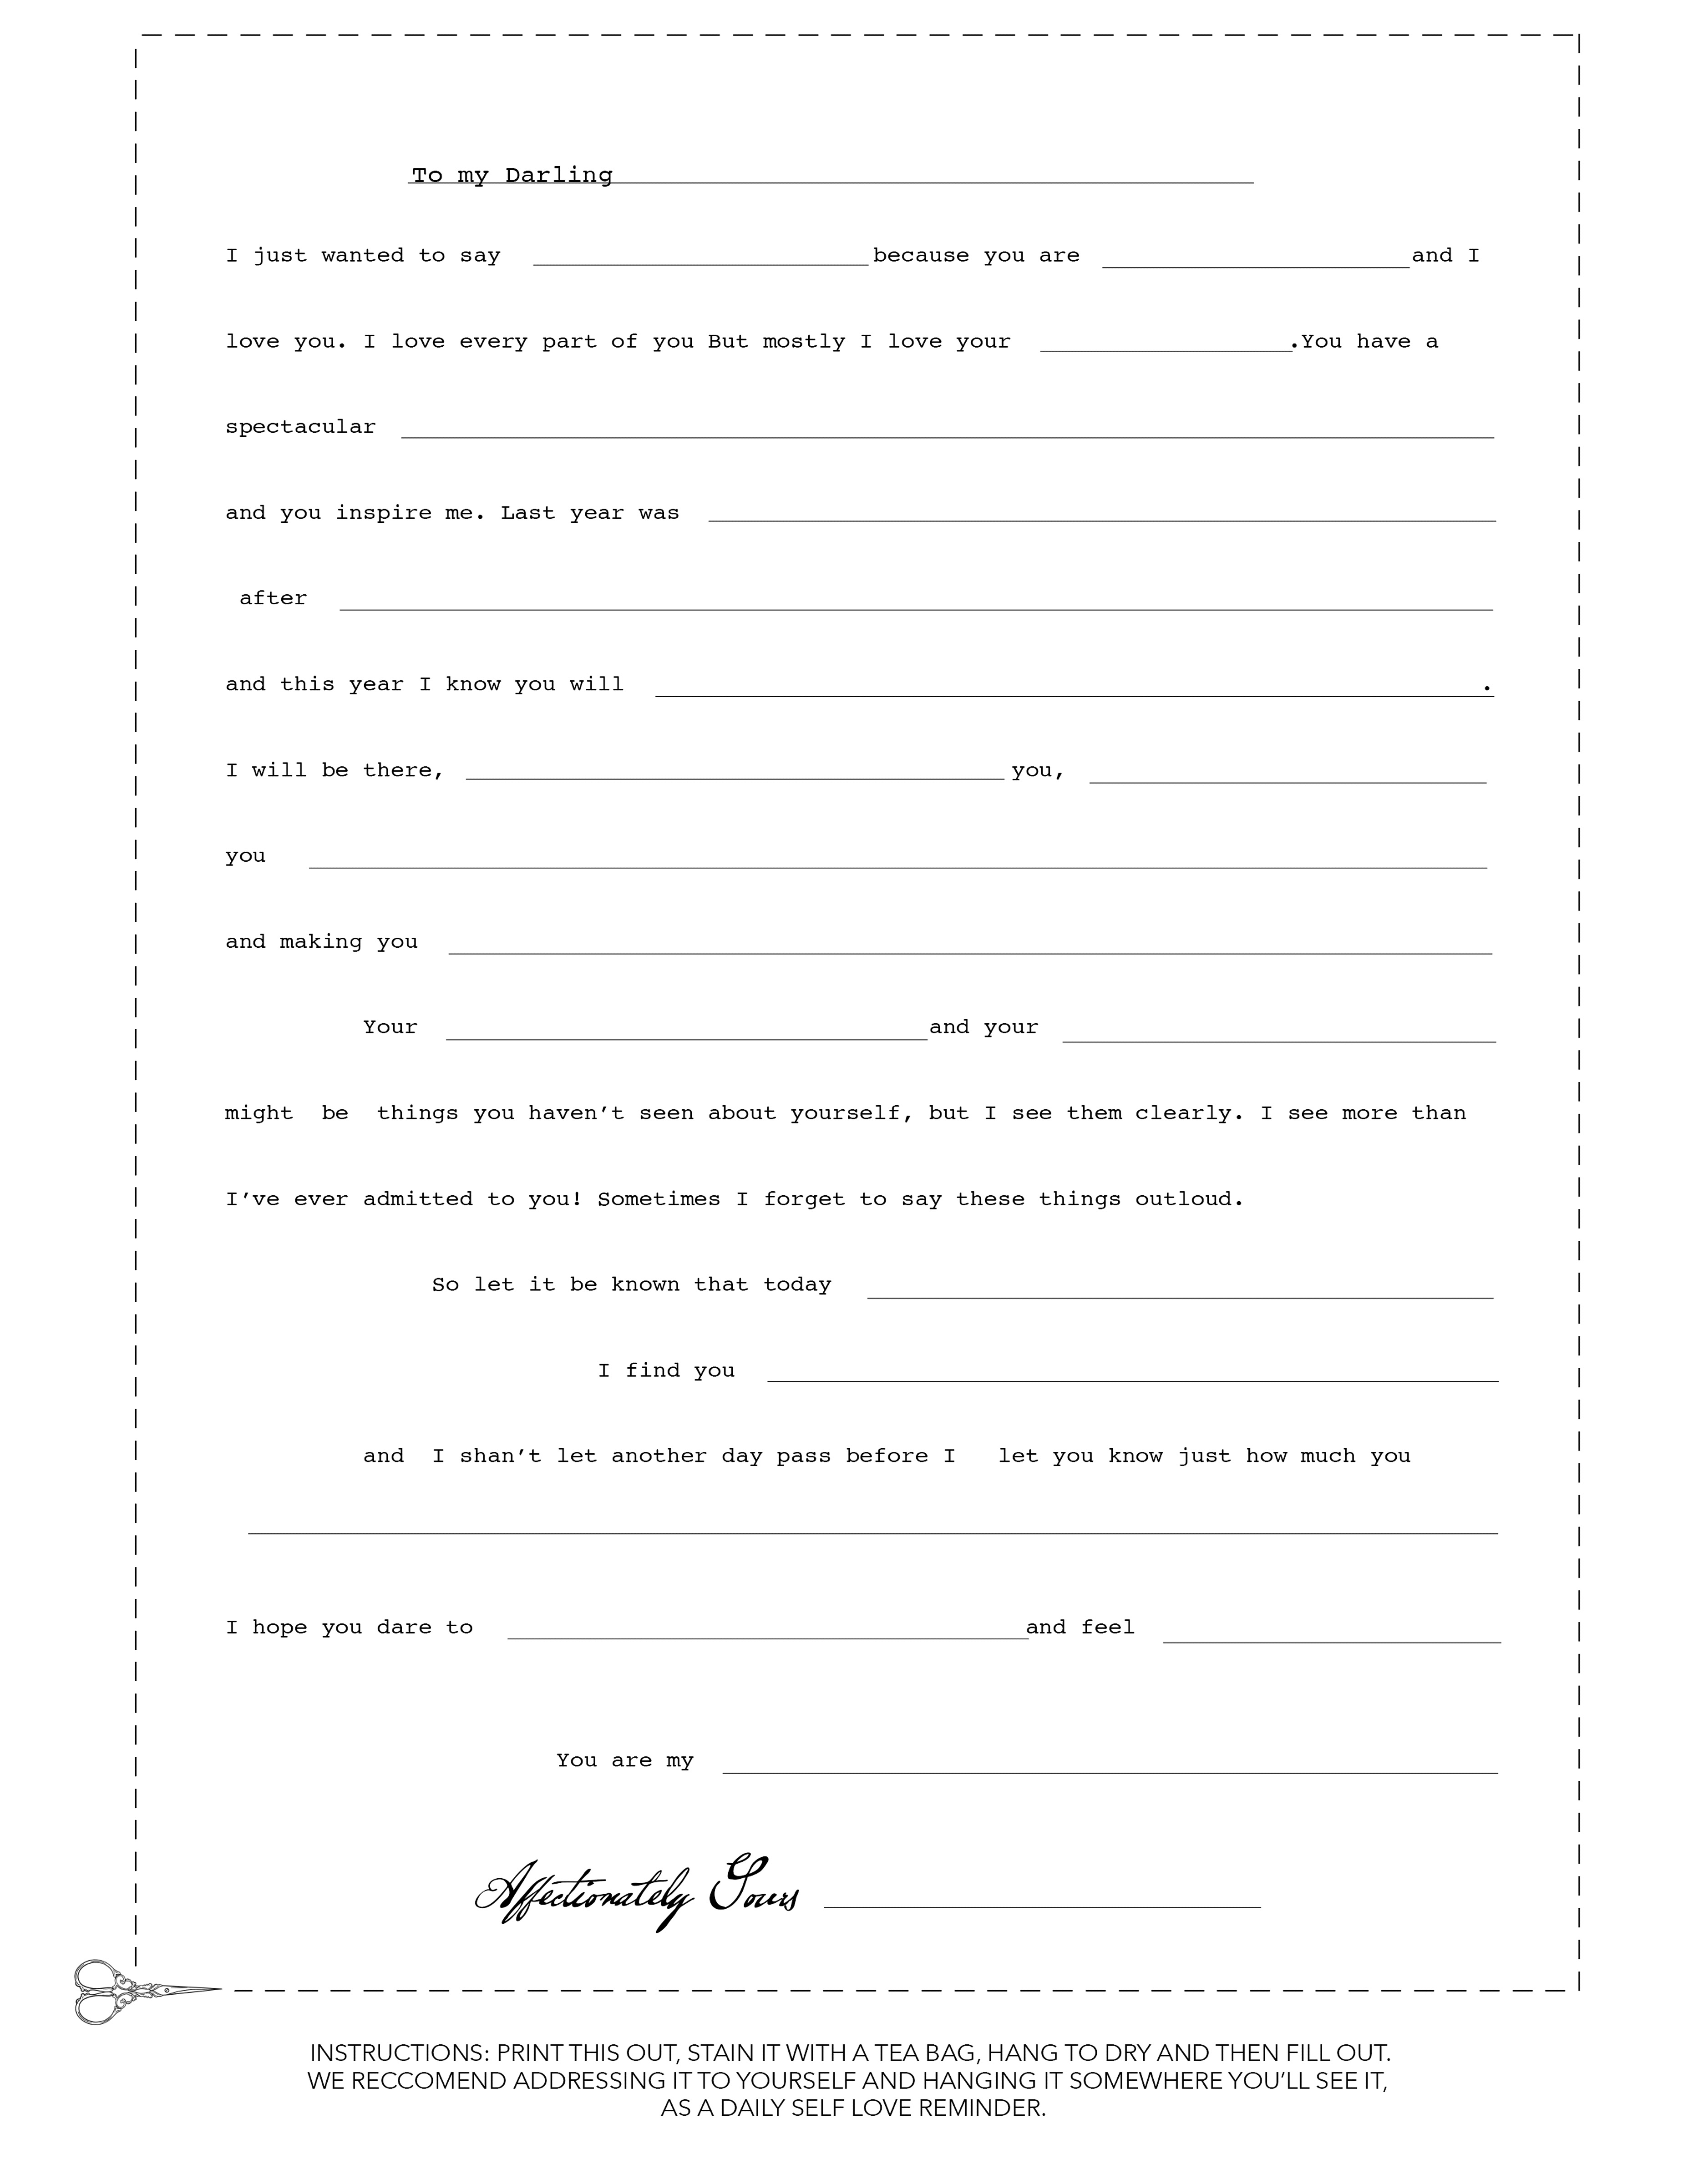 Love Letter Print out